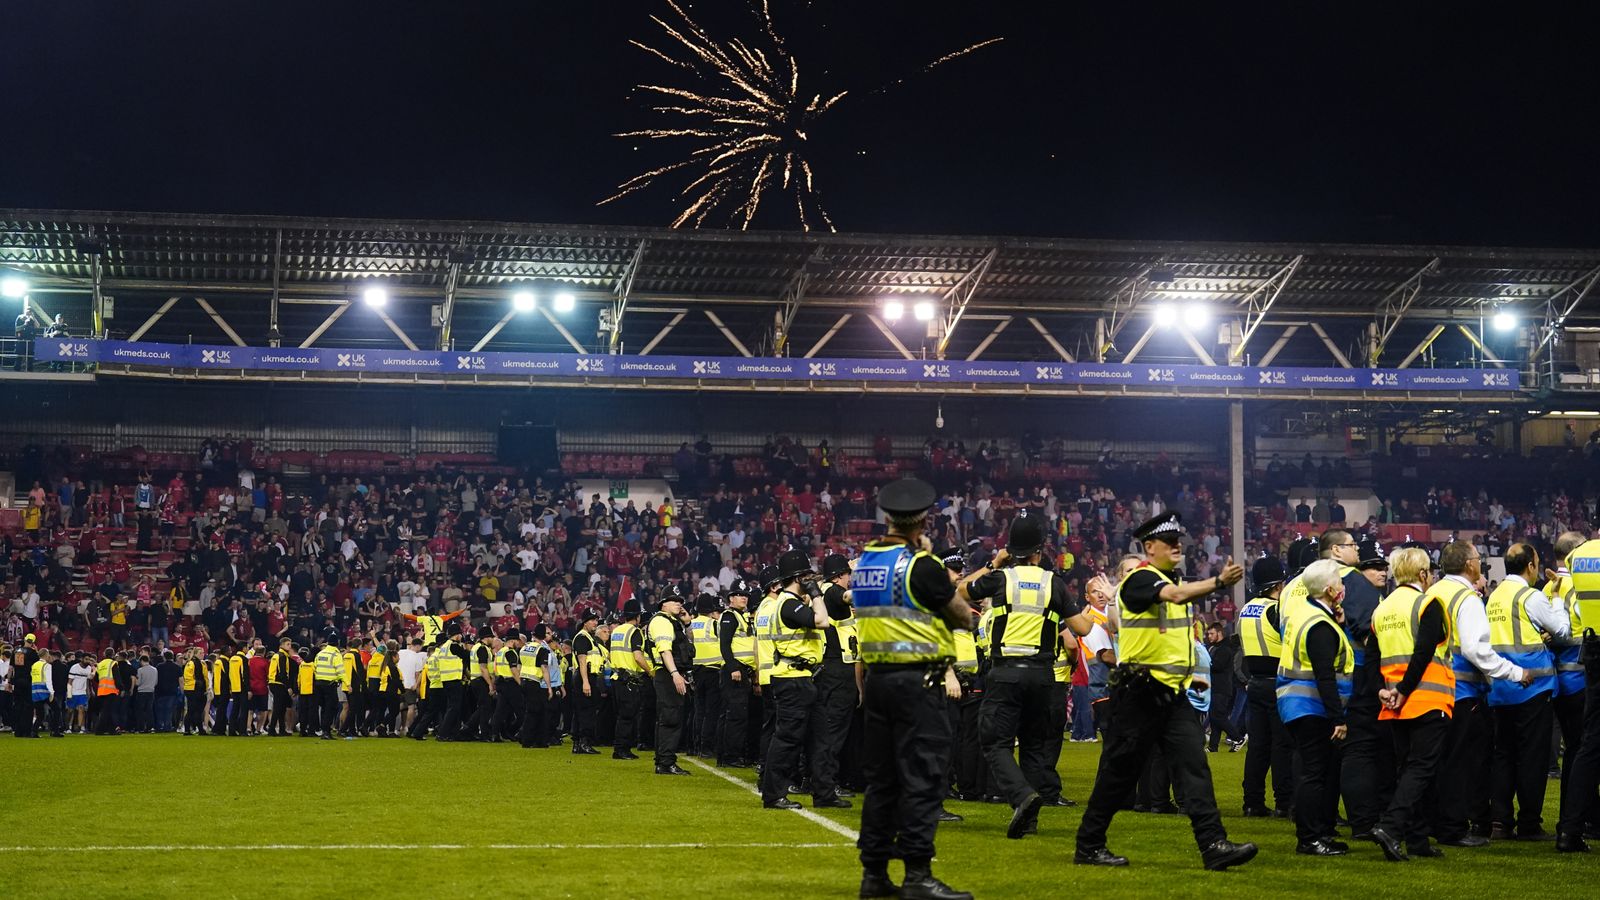 significant-rise-in-crime-at-football-matches-arrests-due-to-fan-disorder-in-england-and-wales-up-by-59-per-cent